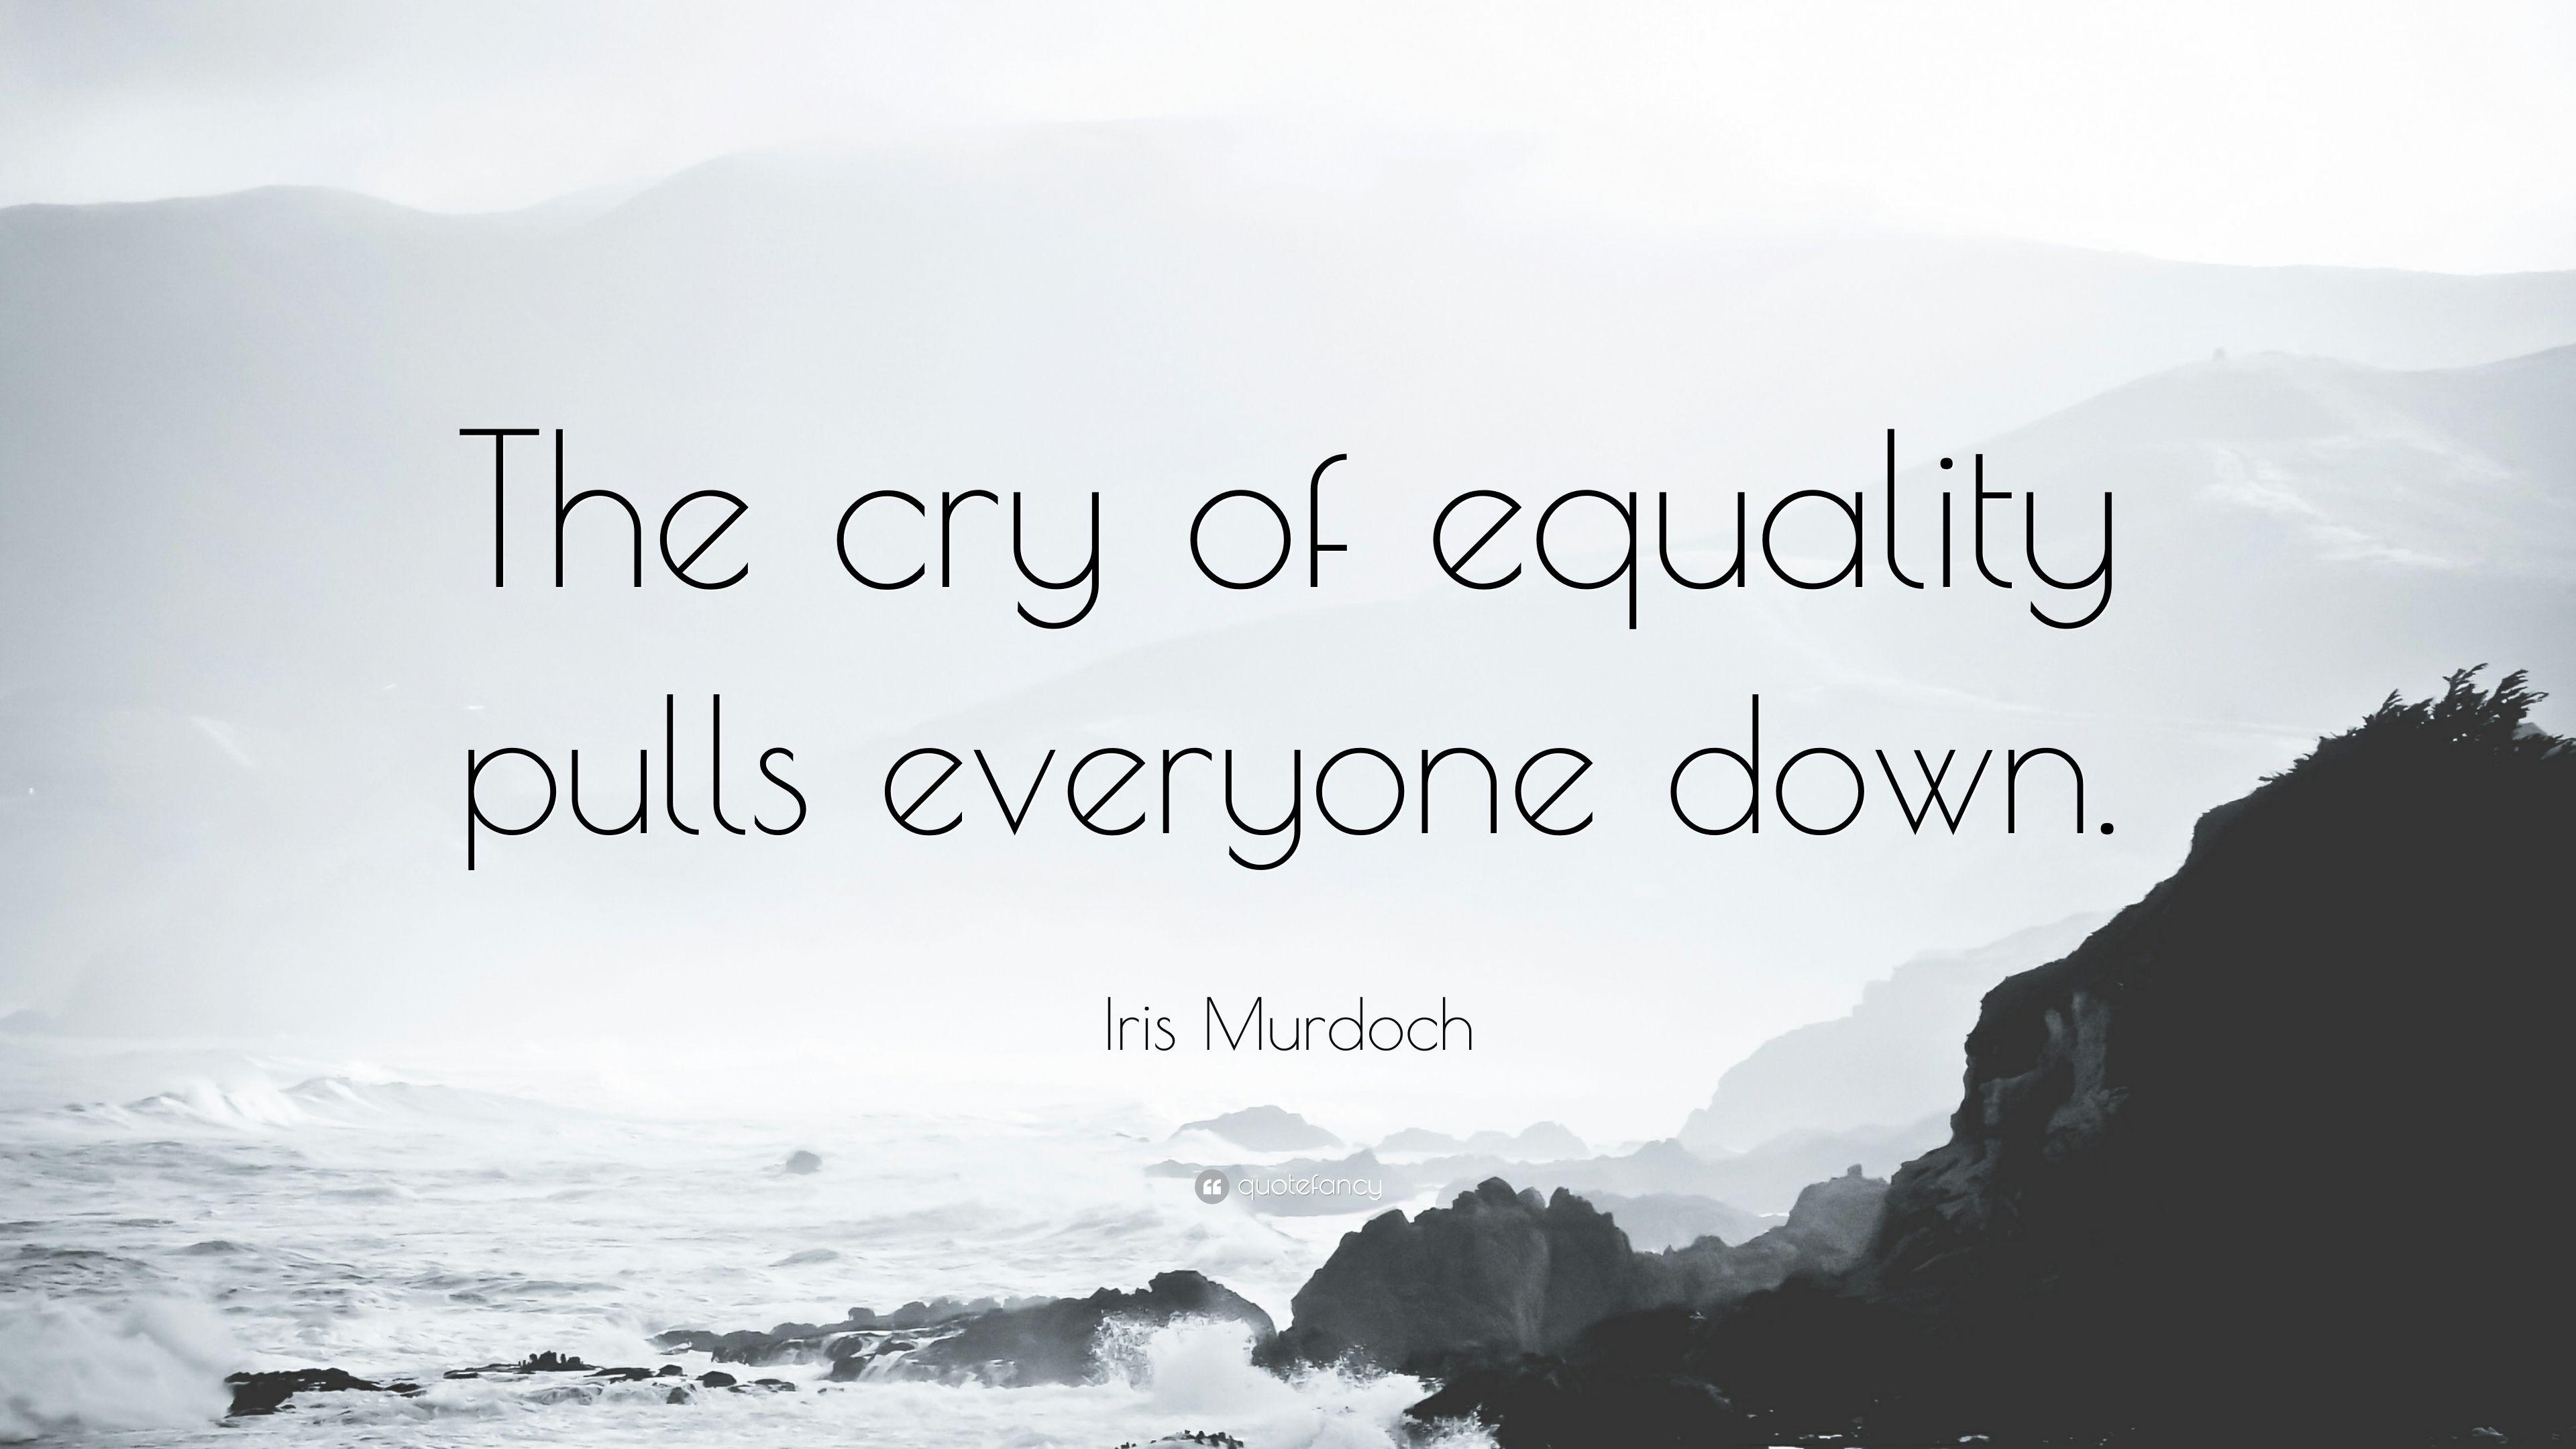 Iris Murdoch Quote: “The cry of equality pulls everyone down.” 6